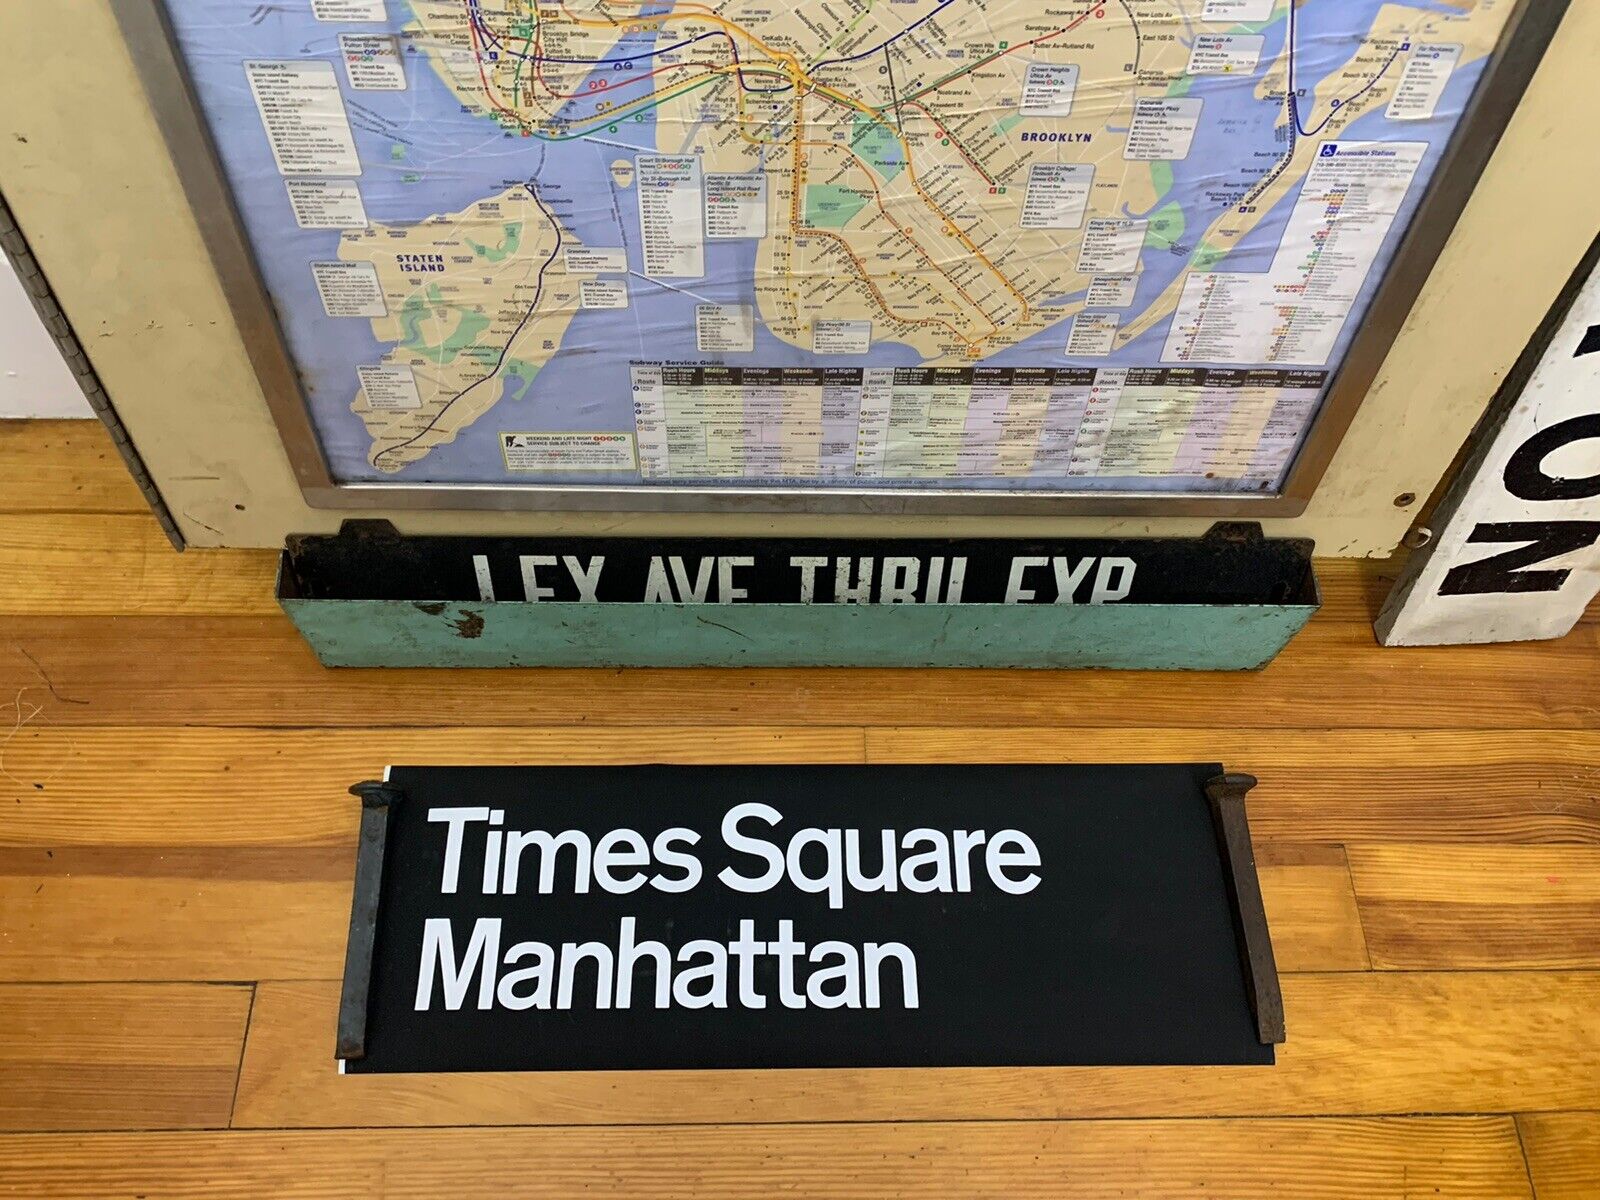 NY NYC SUBWAY ROLL SIGN TIMES SQUARE MANHATTAN DUFFY NEW YEARS EVE THEATER DIST.